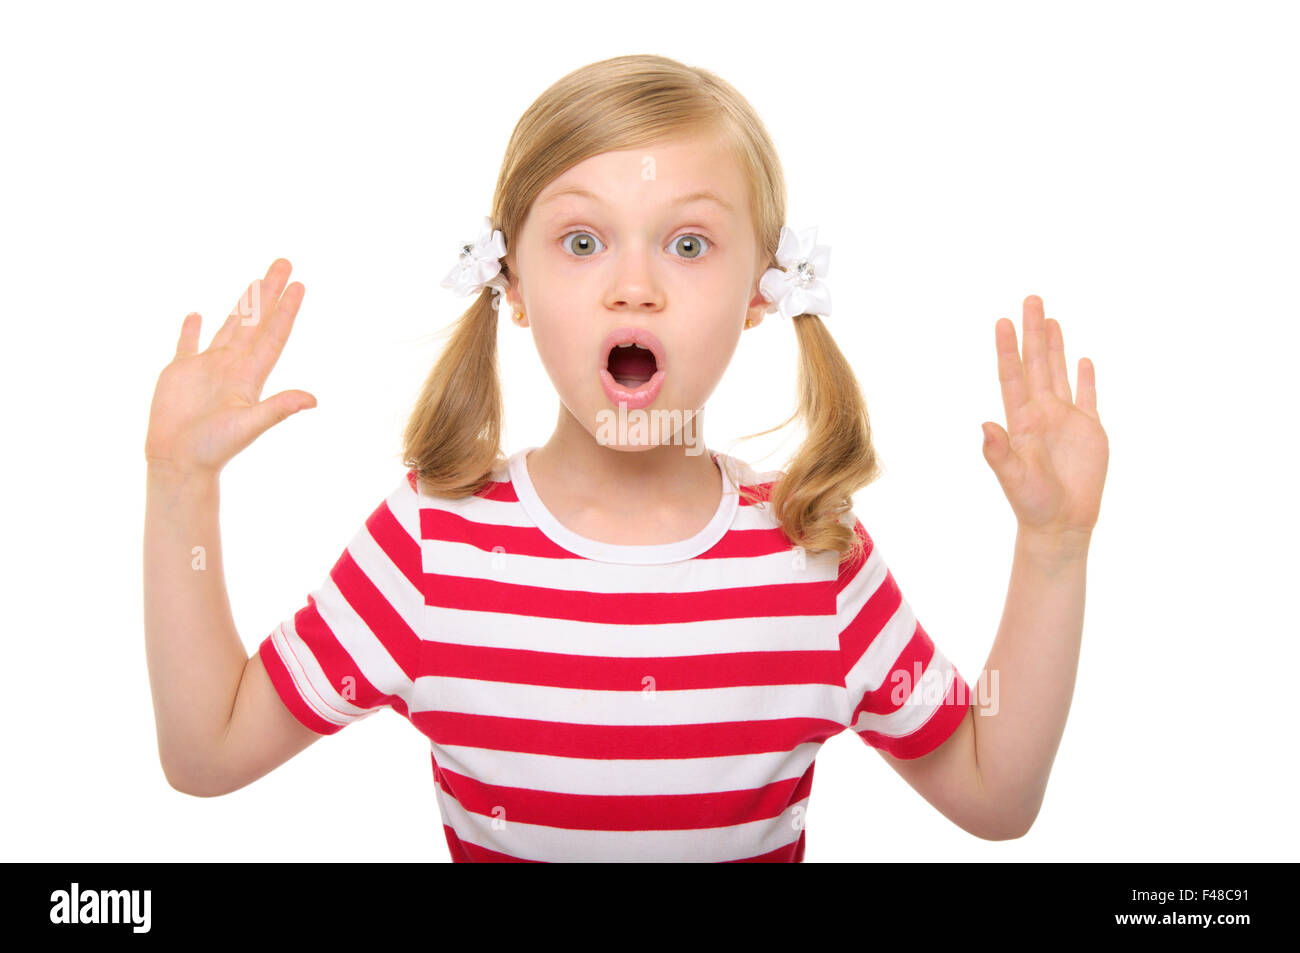 surprised girl with hands up Stock Photo